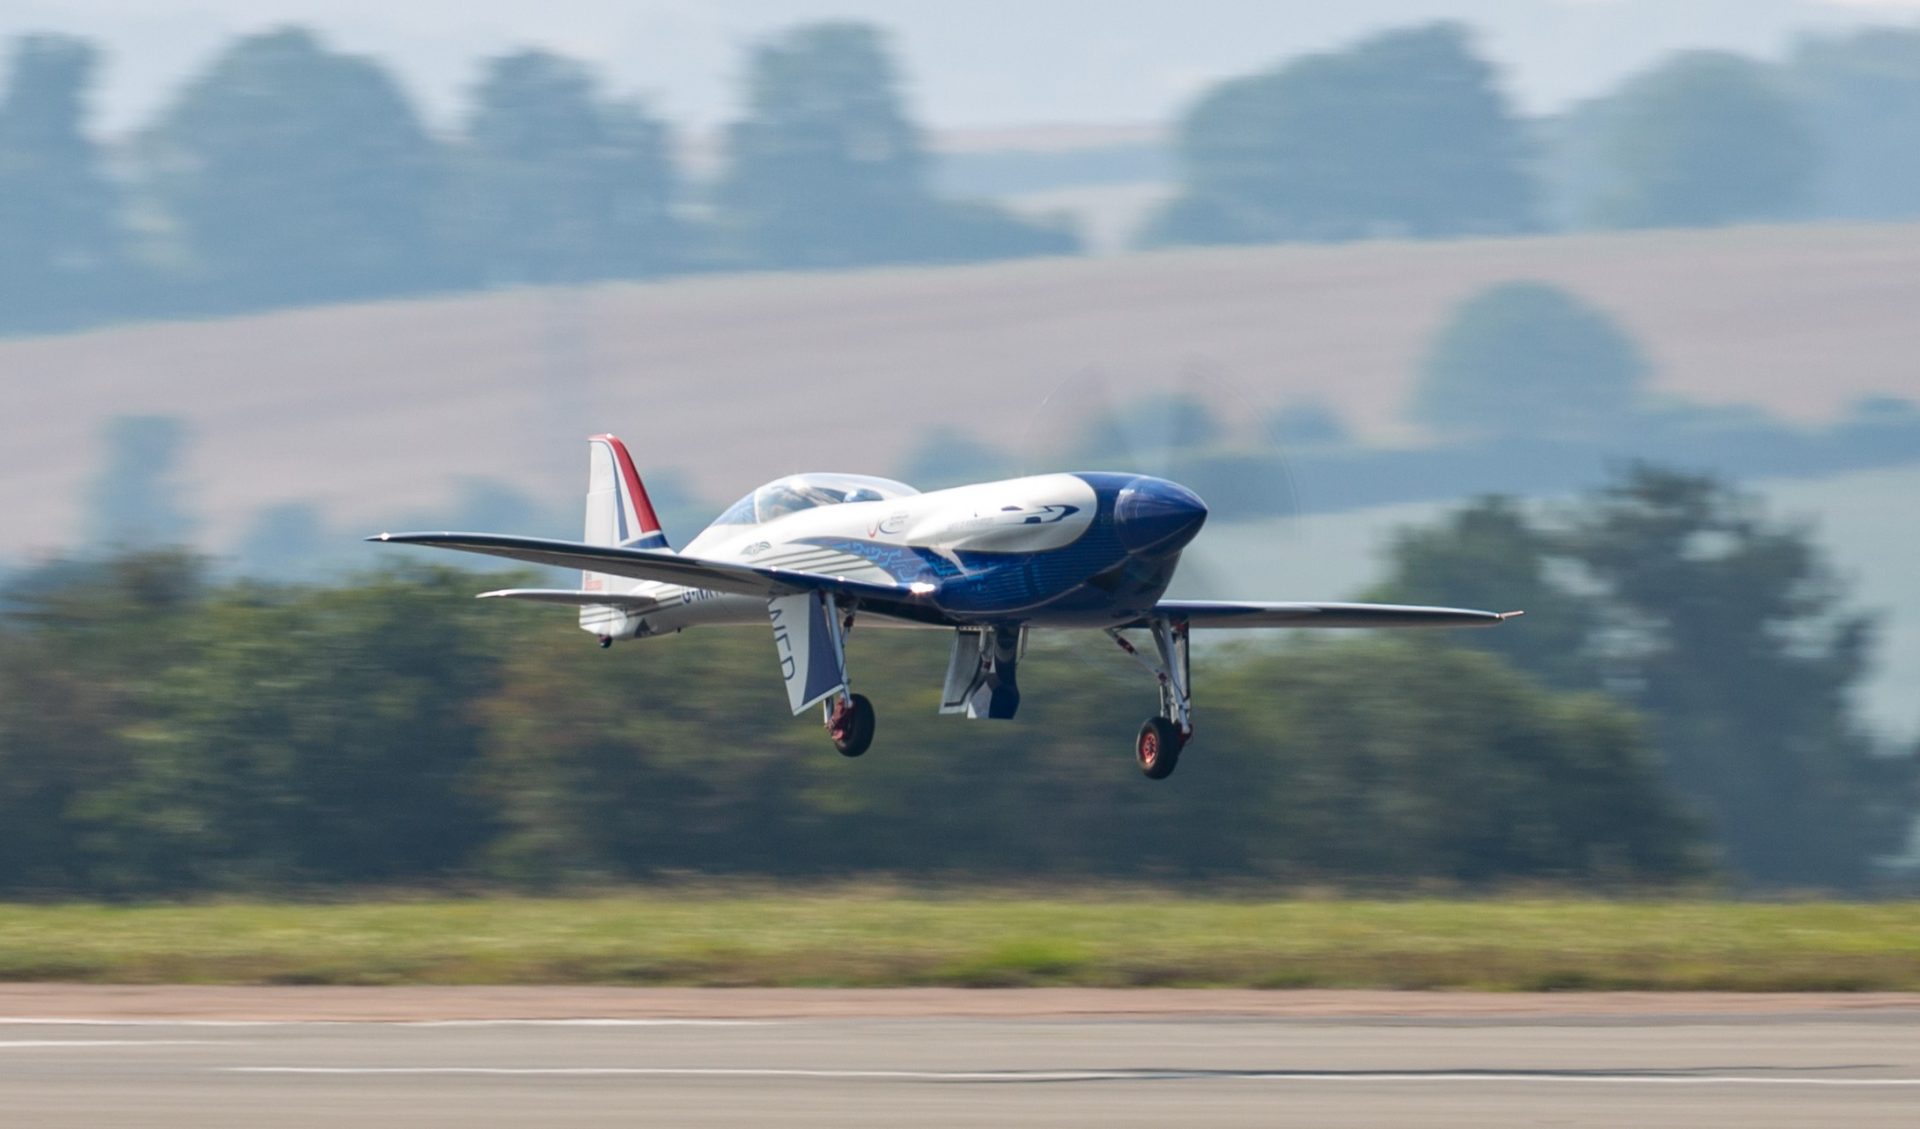 Rolls-Royce’s all-electric airplane completes 15-minute maiden voyage